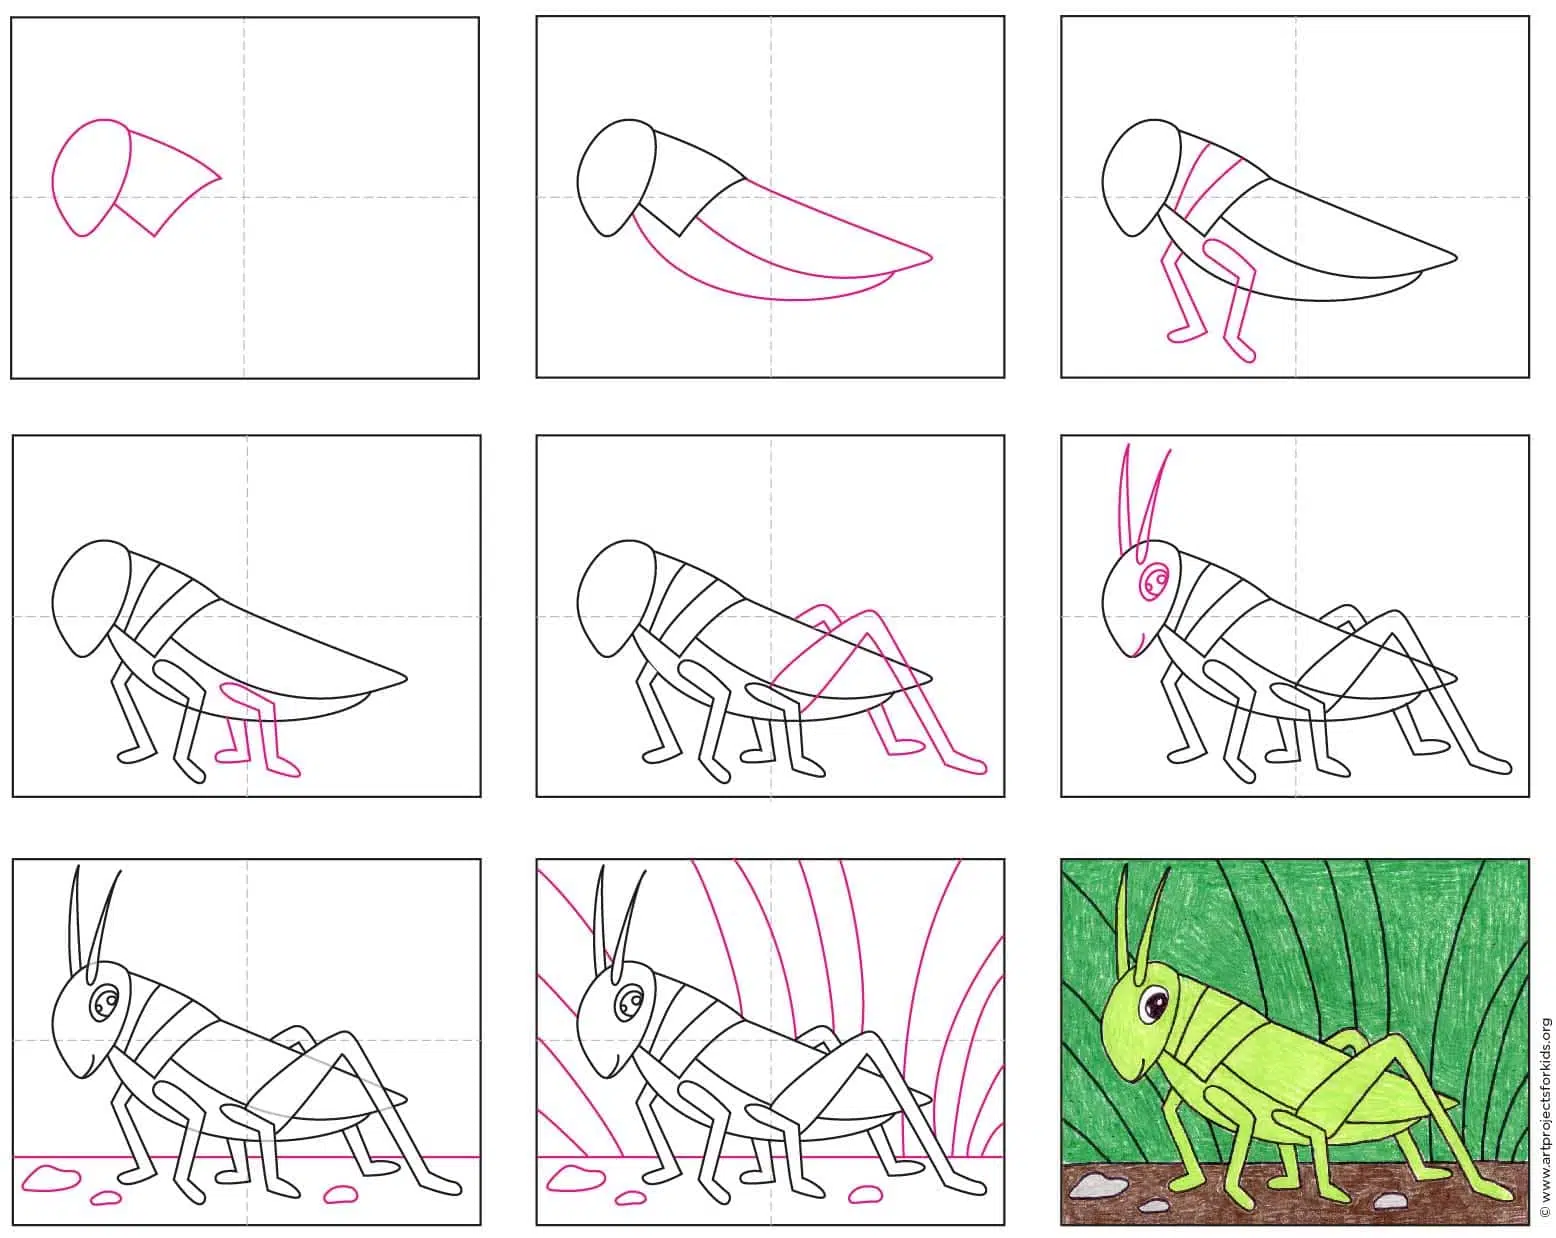 Grasshoppers Vector Hd PNG Images, Grasshopper Drawing Vector Illustration  White, Character, Set, On PNG Image For Free Download